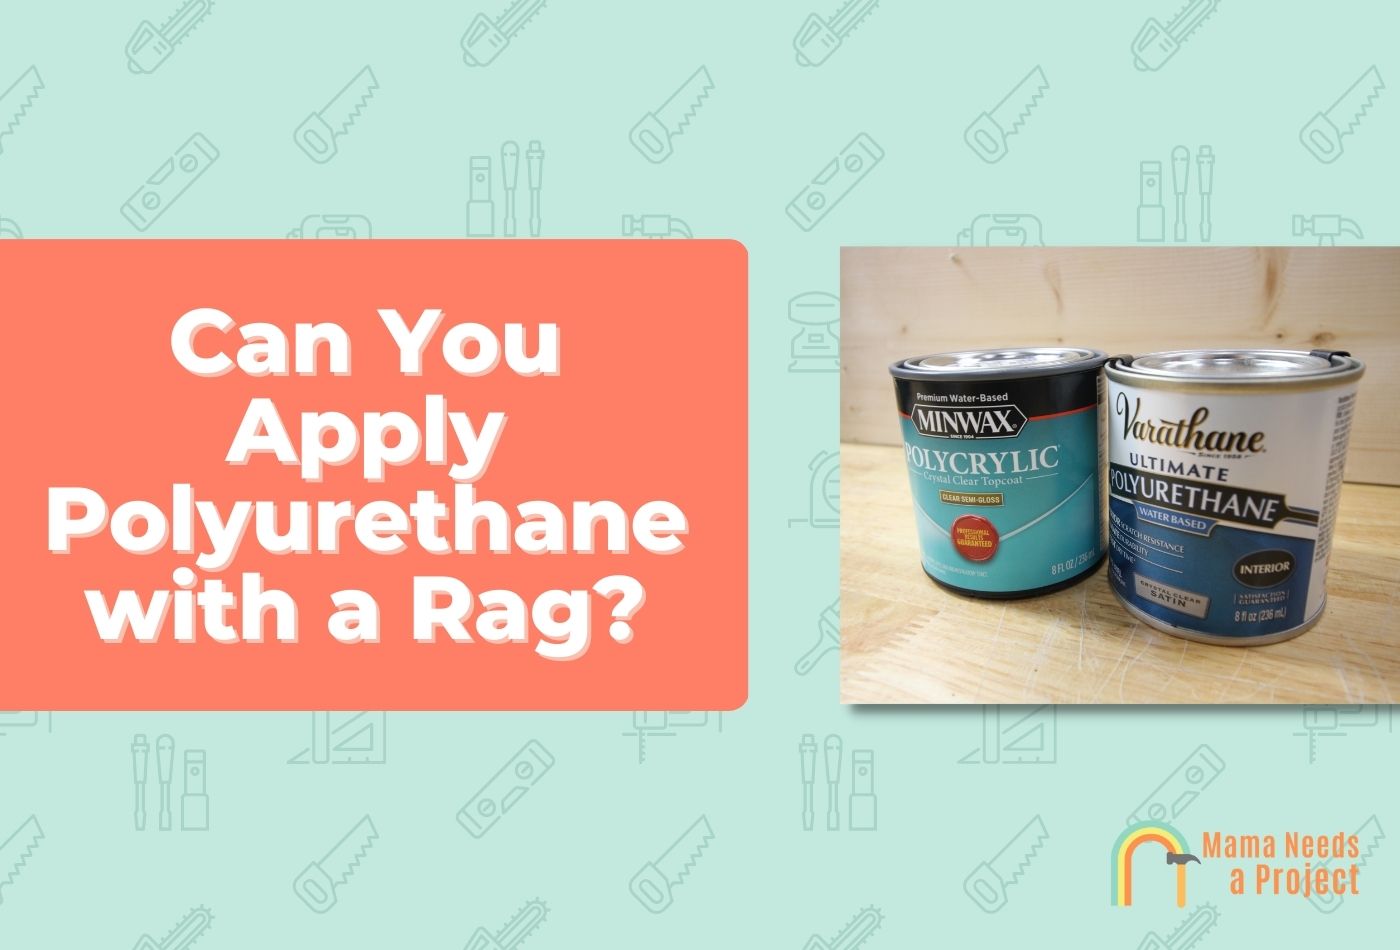 Can You Apply Polyurethane with a Rag